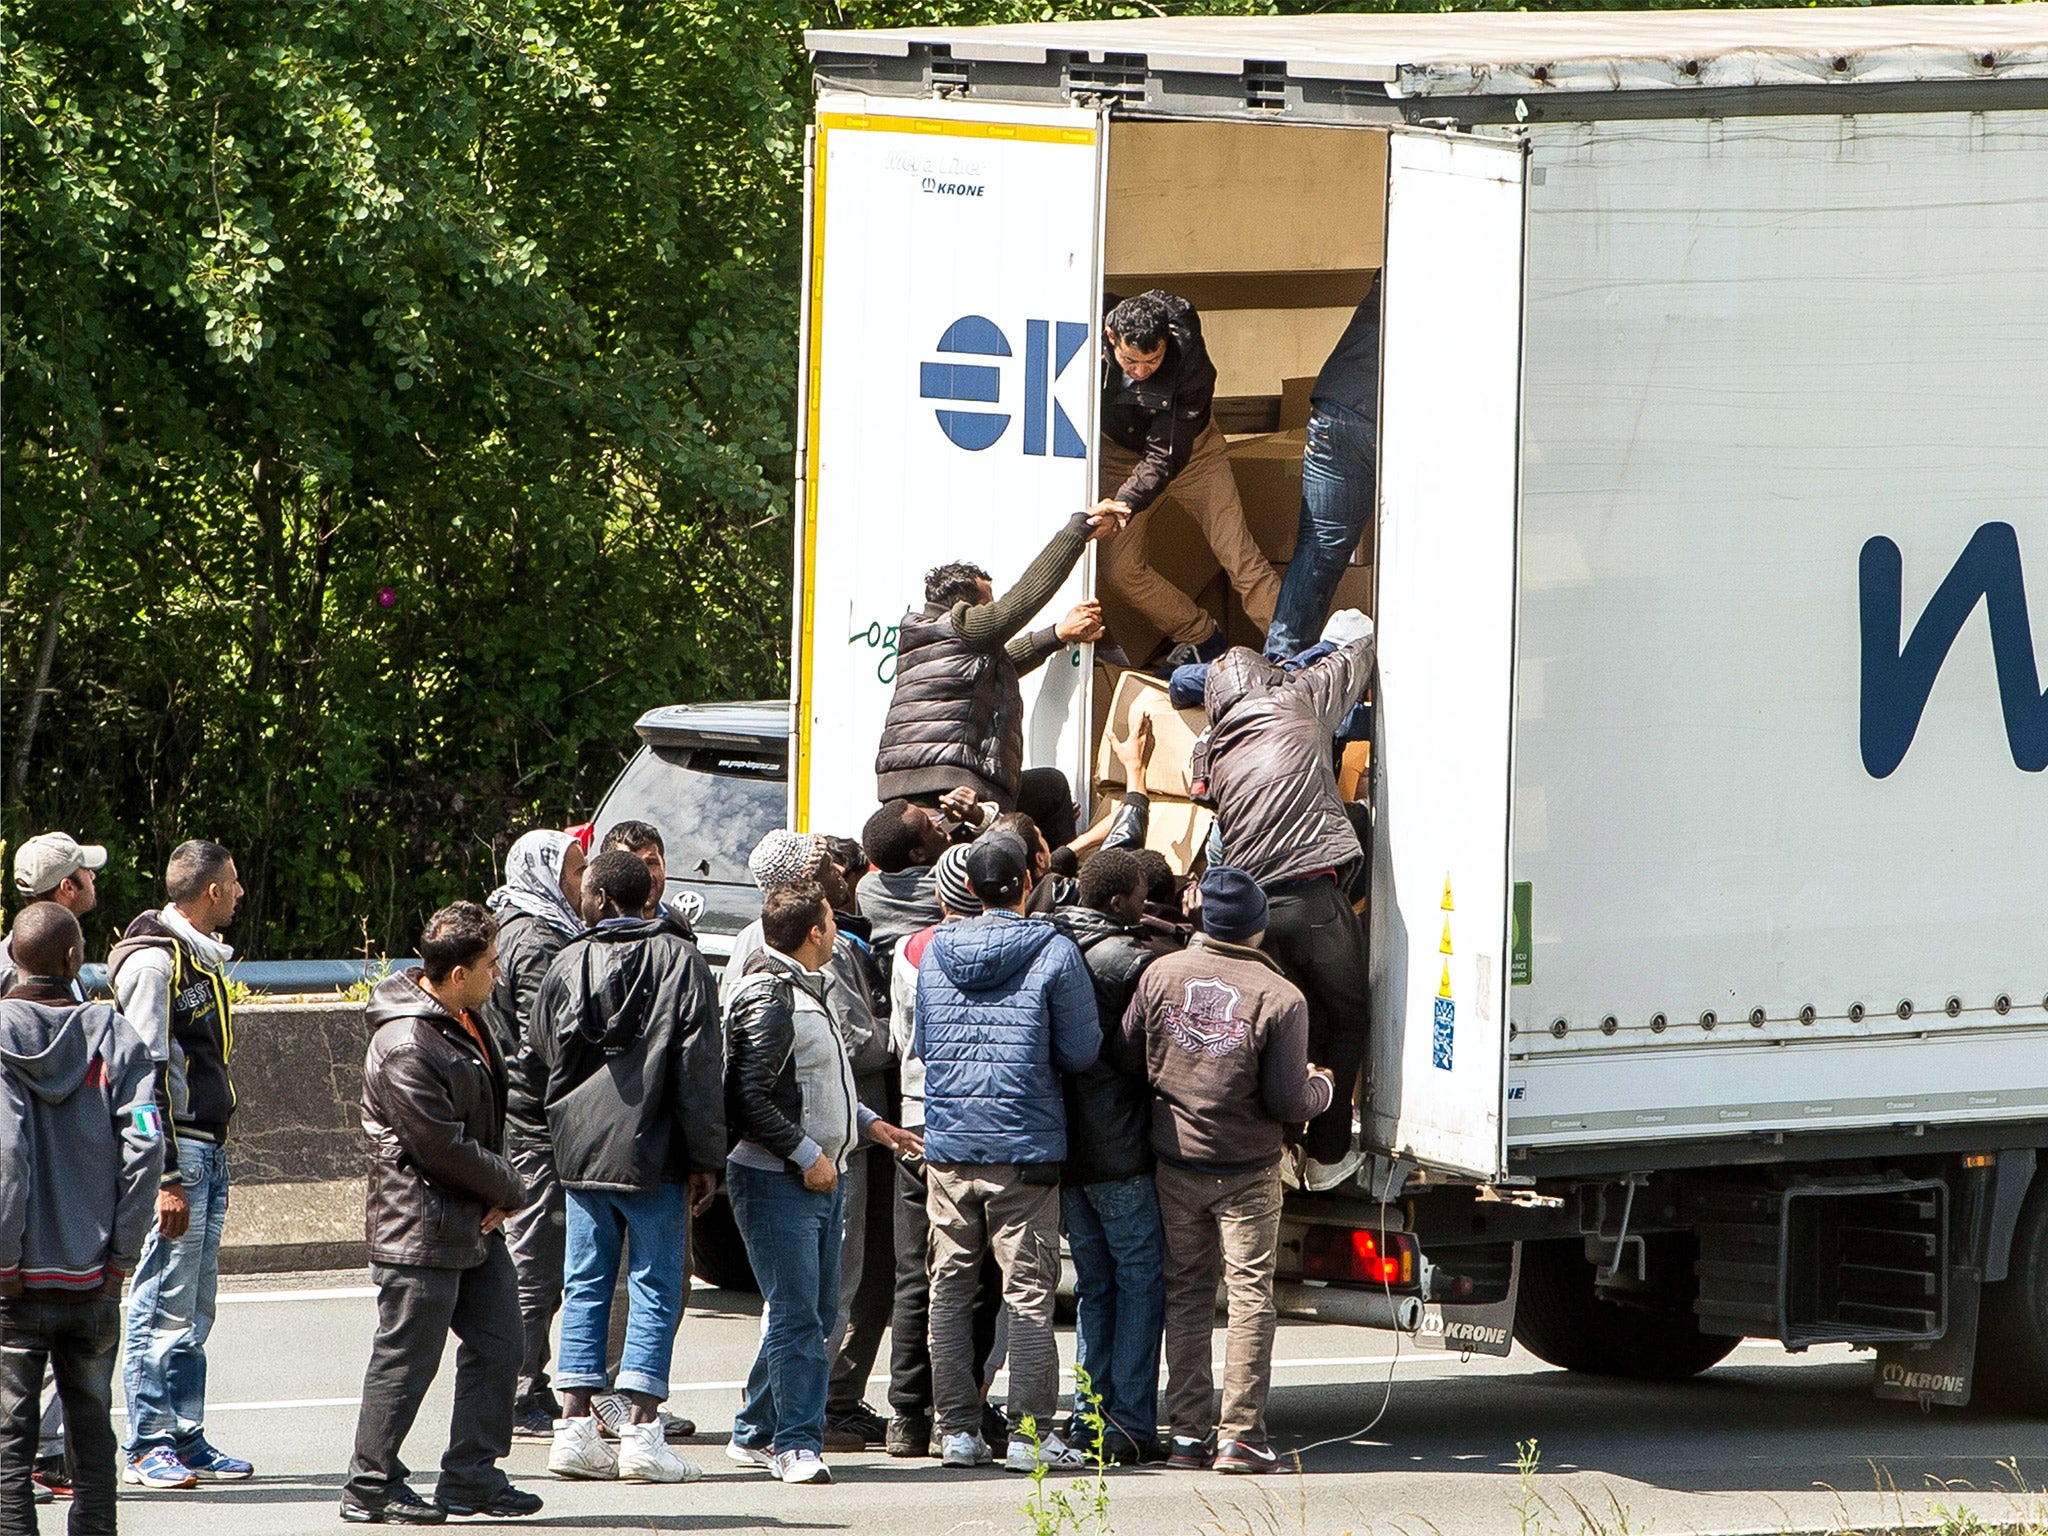 Migrants climbing into the back of a lorry on the A16 highway in northern France leading to the Channel Tunnel